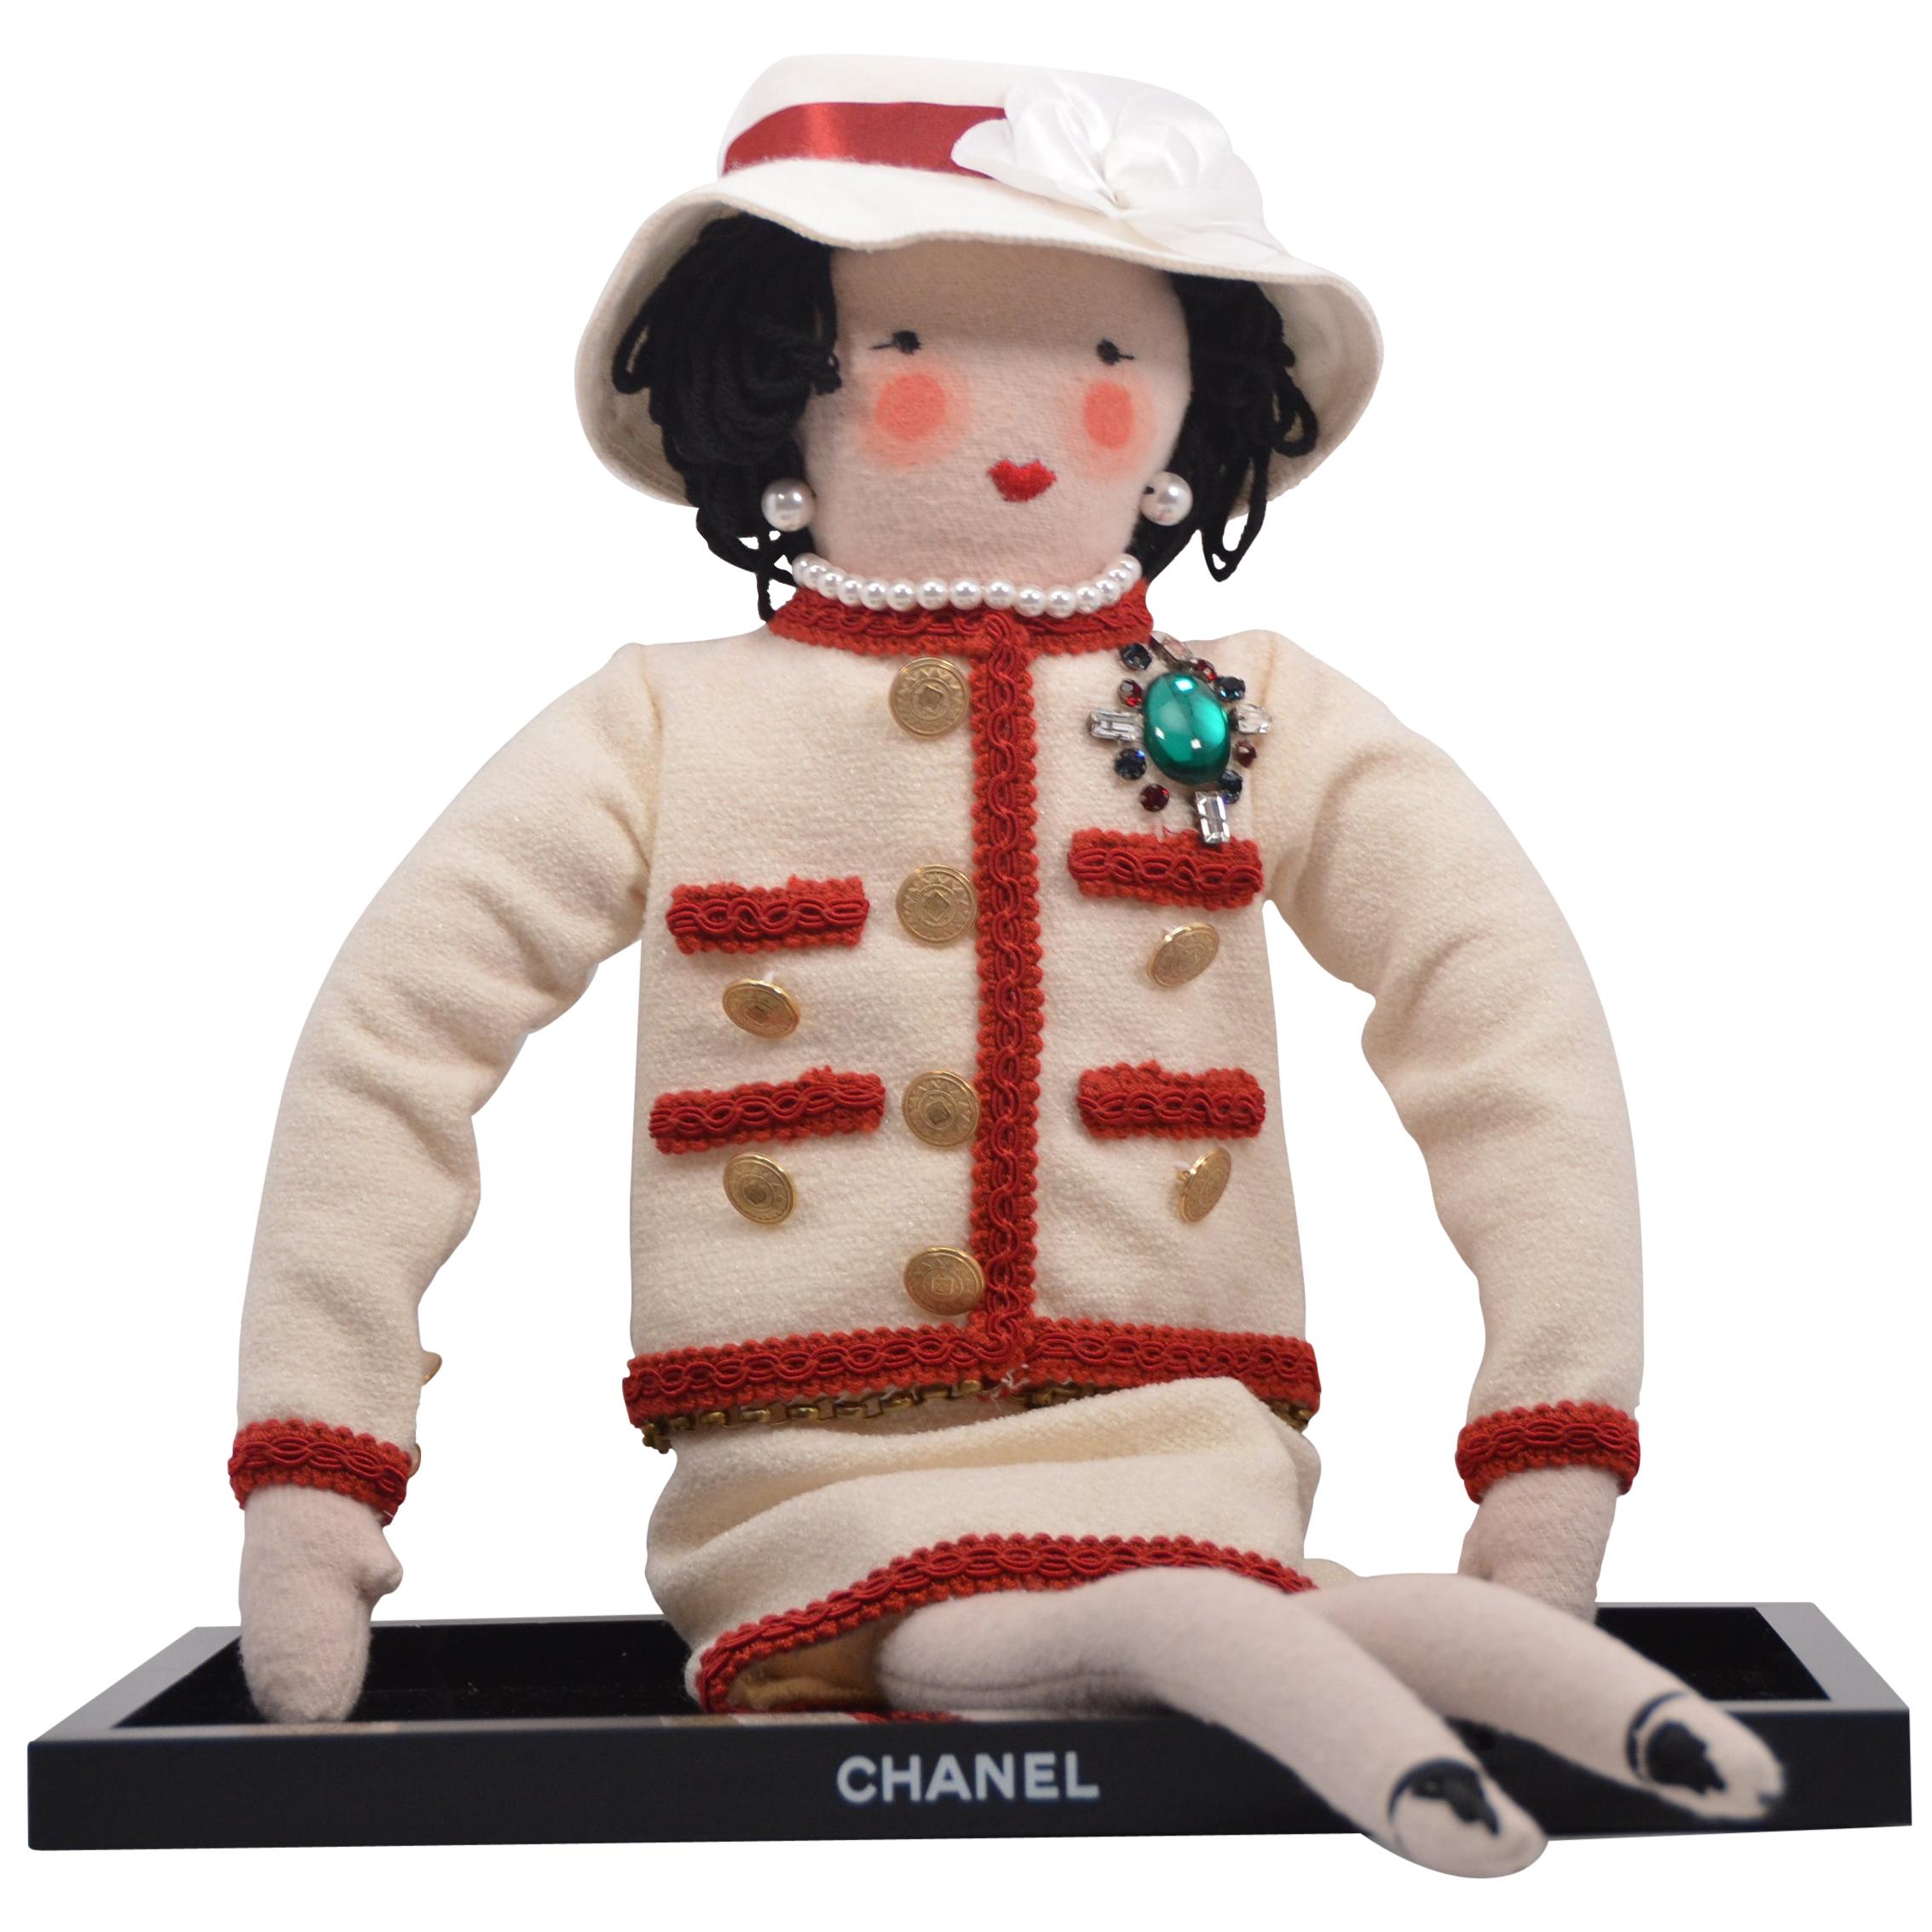 Coco Mademoiselle Chanel Doll Designed By Karl Lagerfeld 2010 For Sale